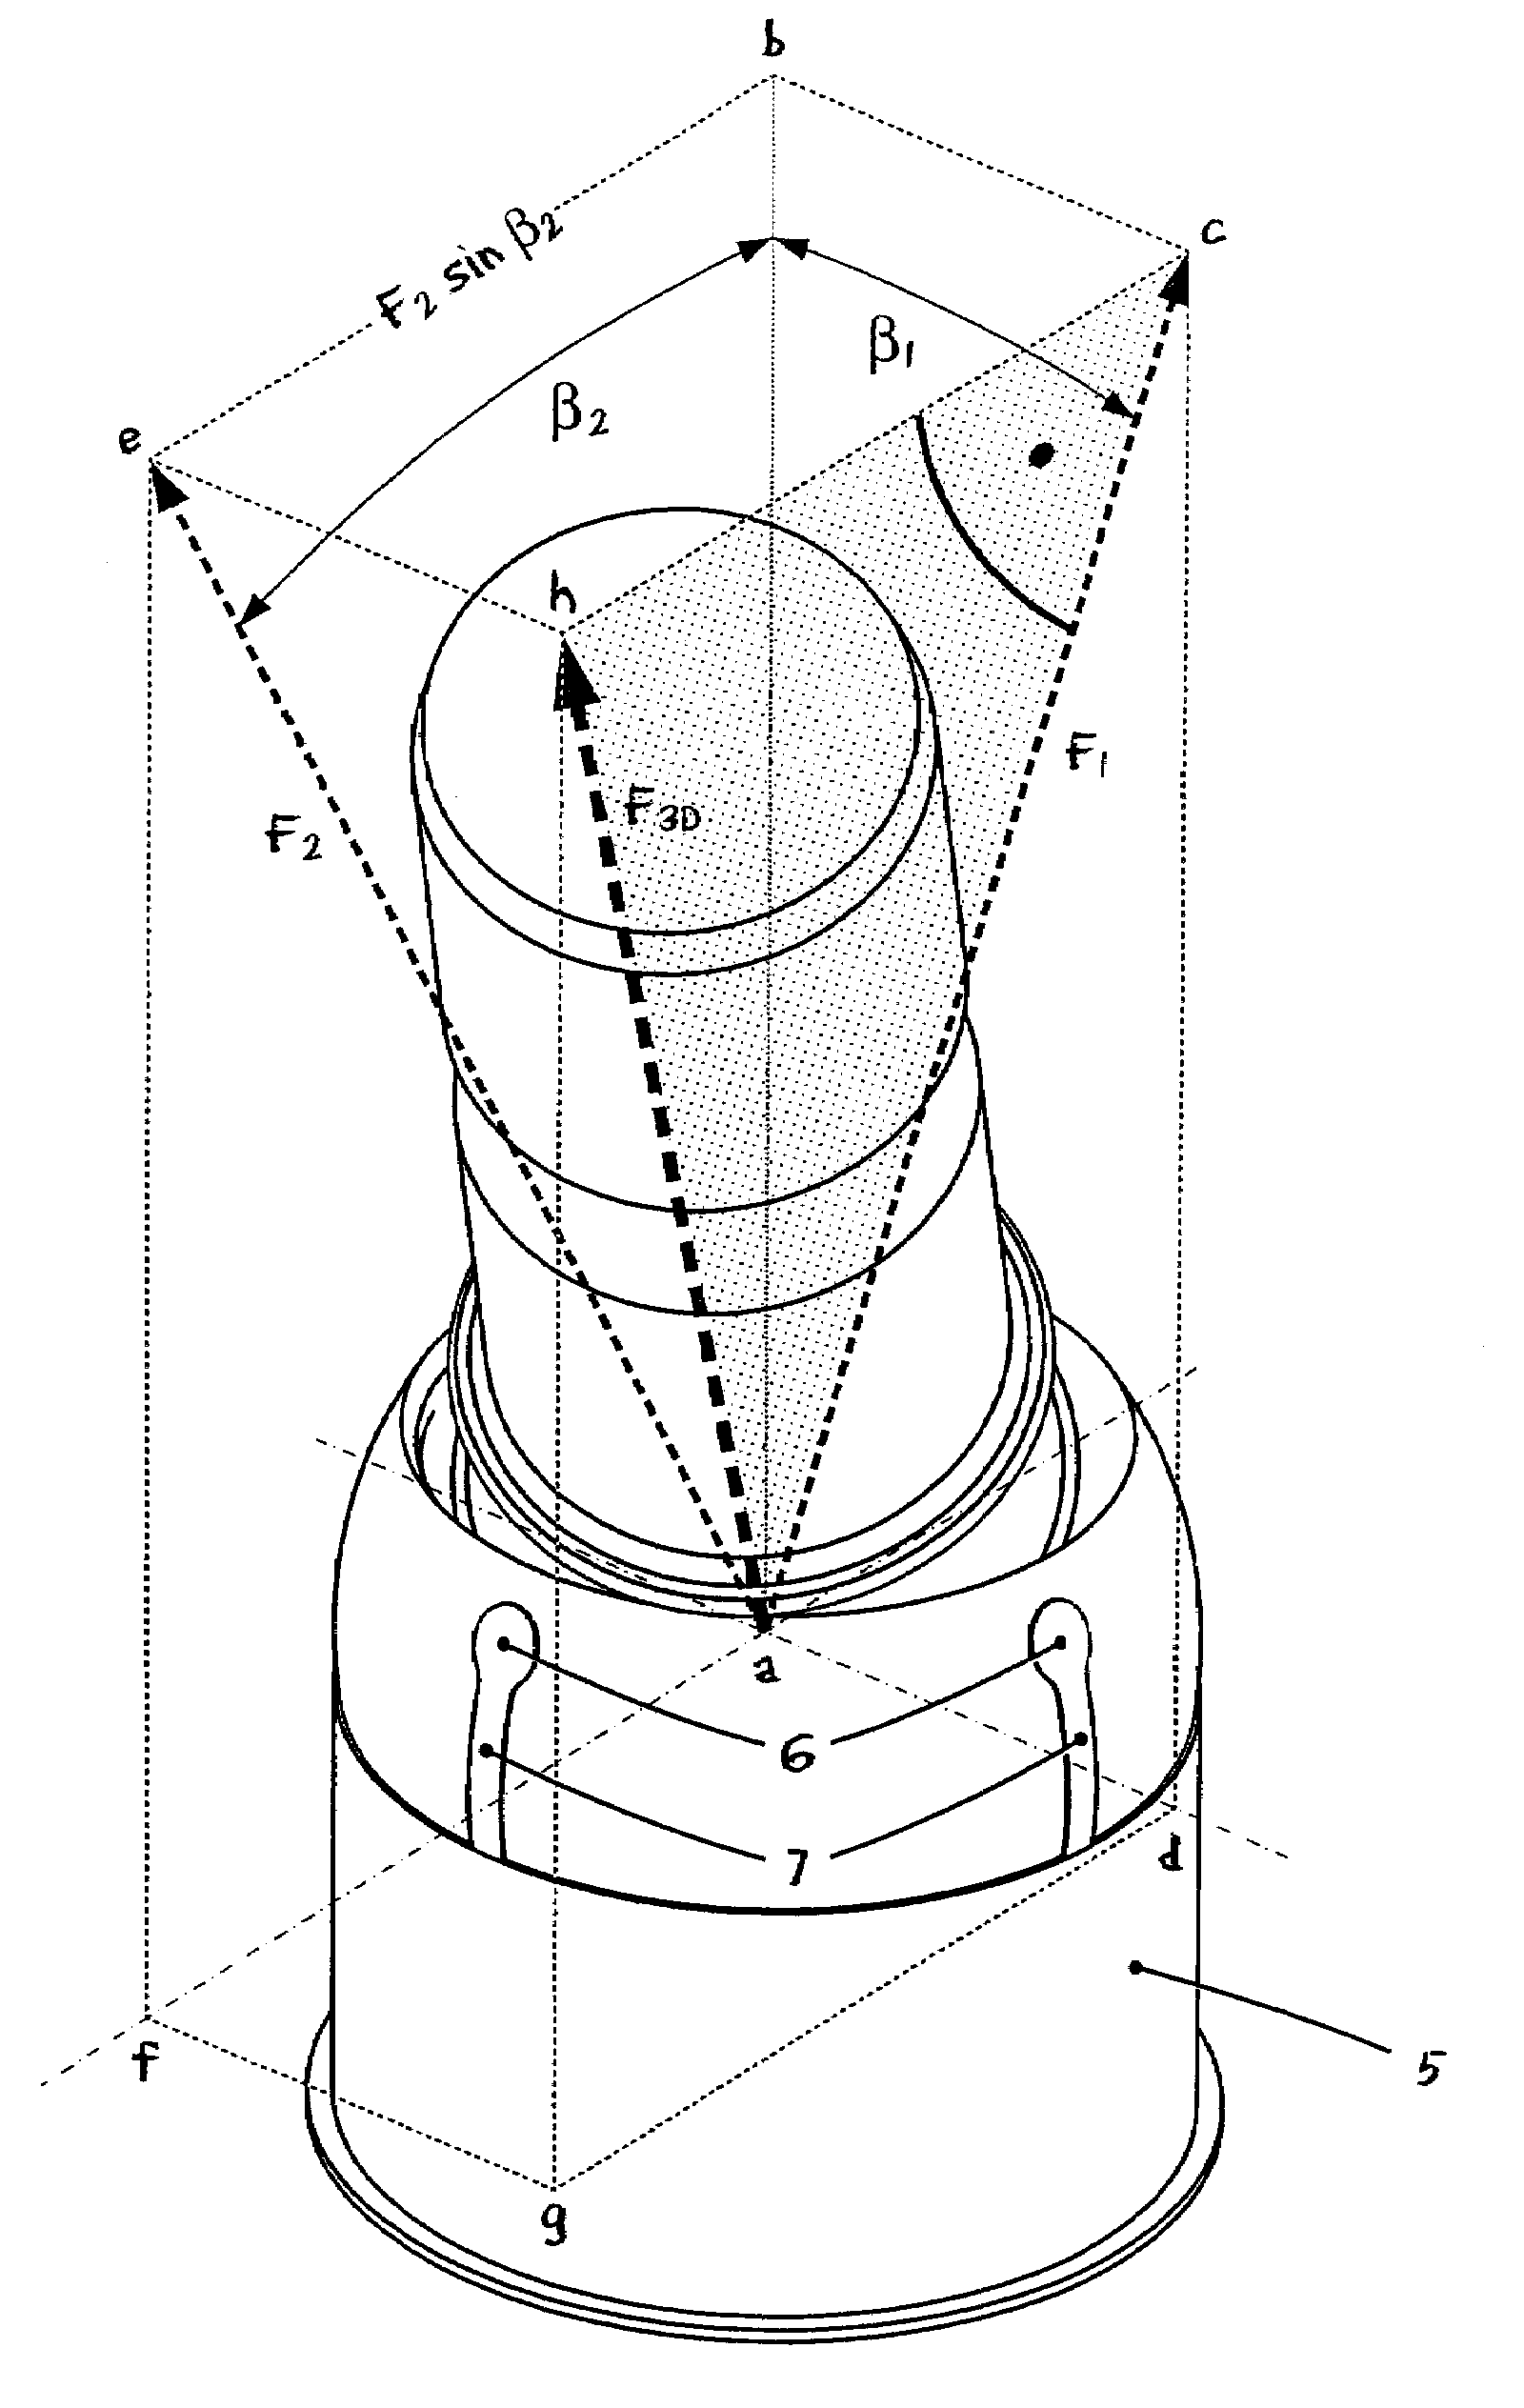 Ball and socket joint with sensor device, process for load measurement and process for wear measurement